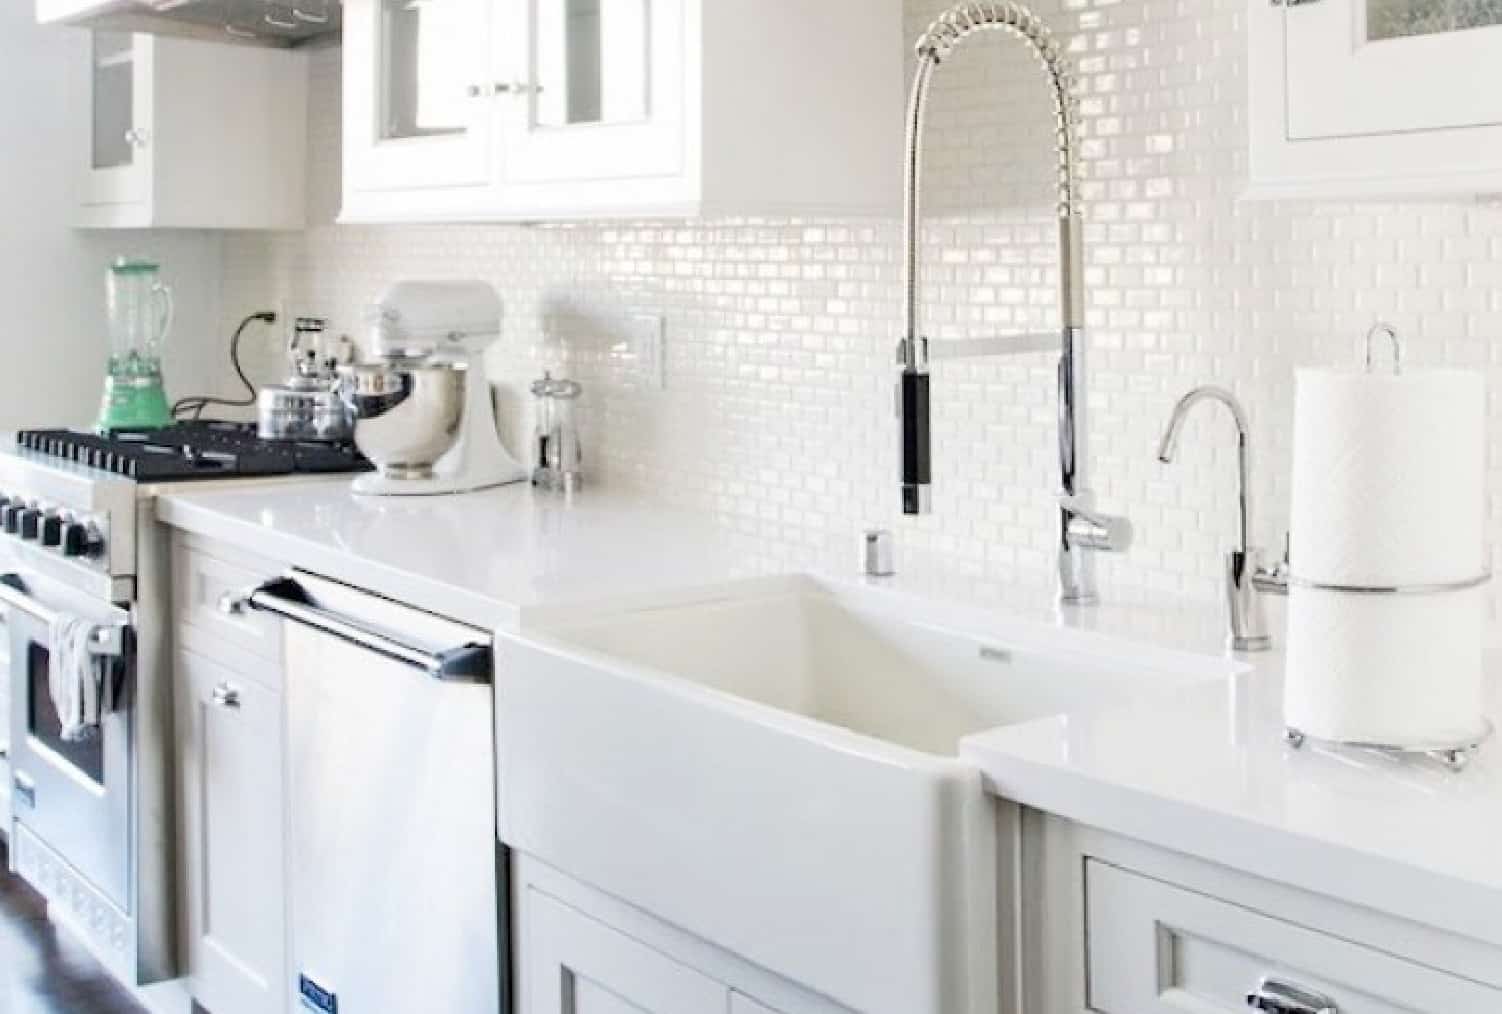 this all-white kitchen with a basin sink, pull-down faucet and mini-tile backsplash offers the perfect kitchen upgrade ideas for modern farmhouse lovers.